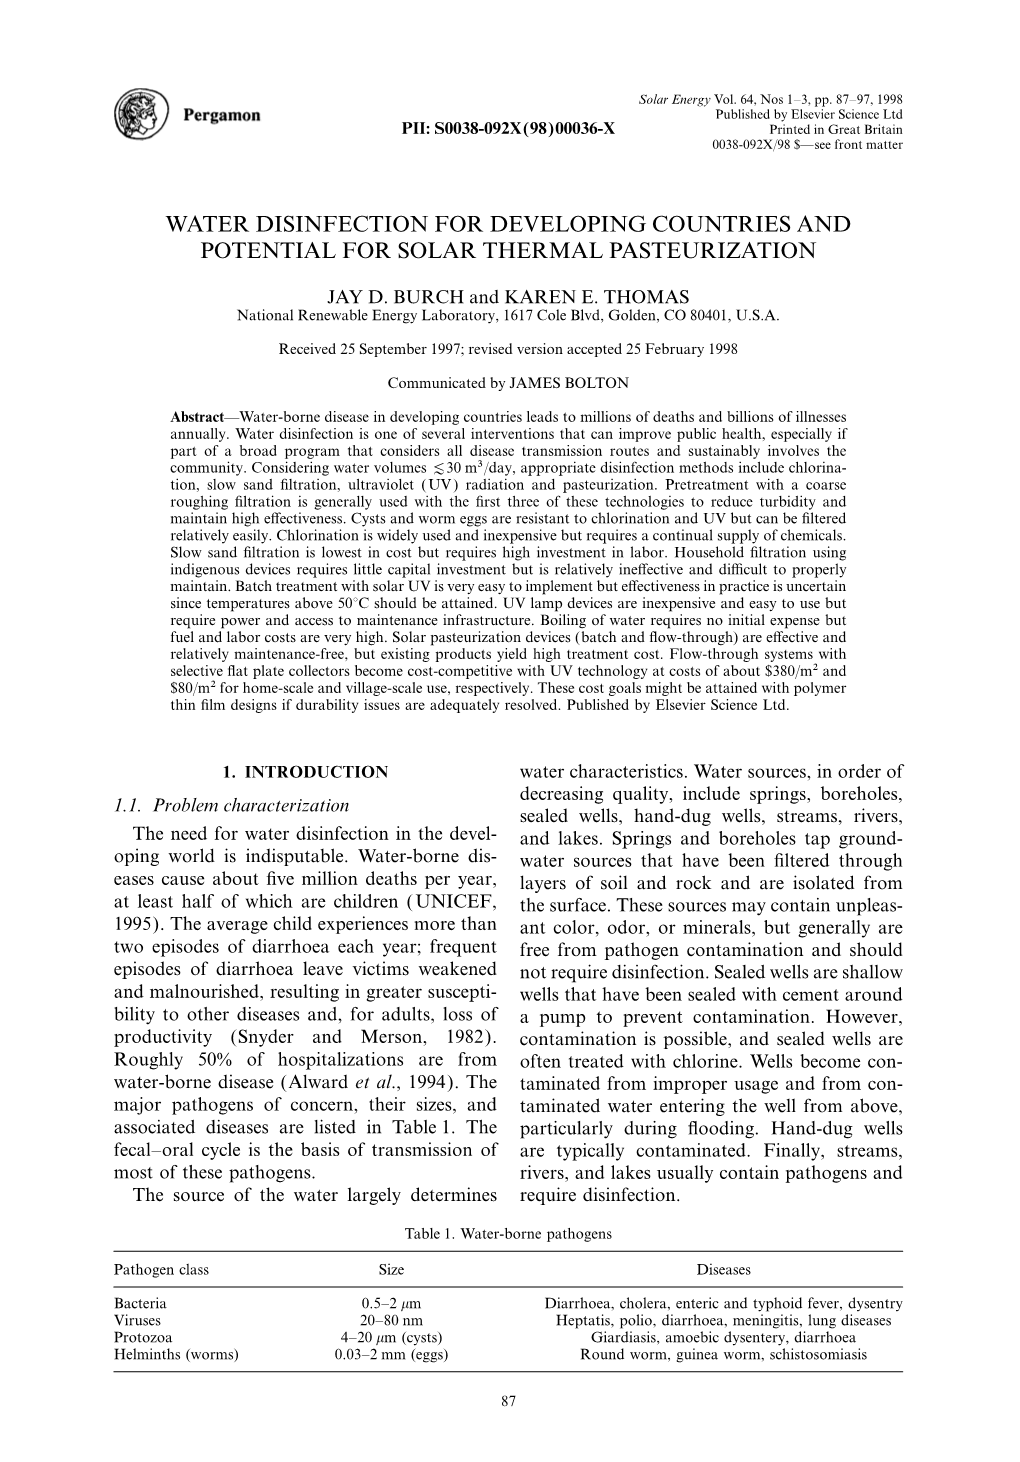 Water Disinfection for Developing Countries and Potential for Solar Thermal Pasteurization